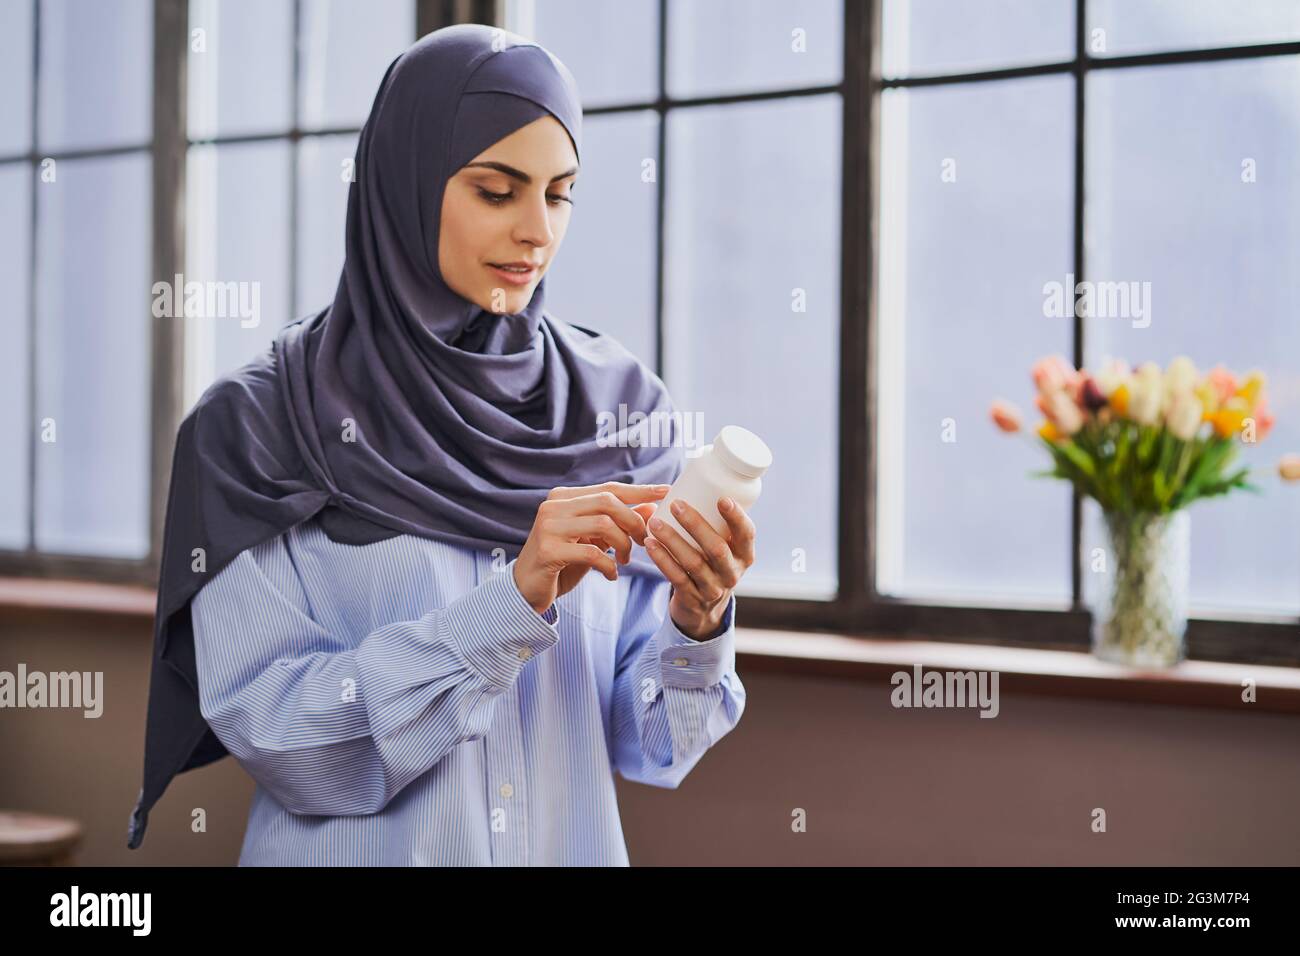 Muslim woman holding a bottle of pills and reading the list of ingredients Stock Photo